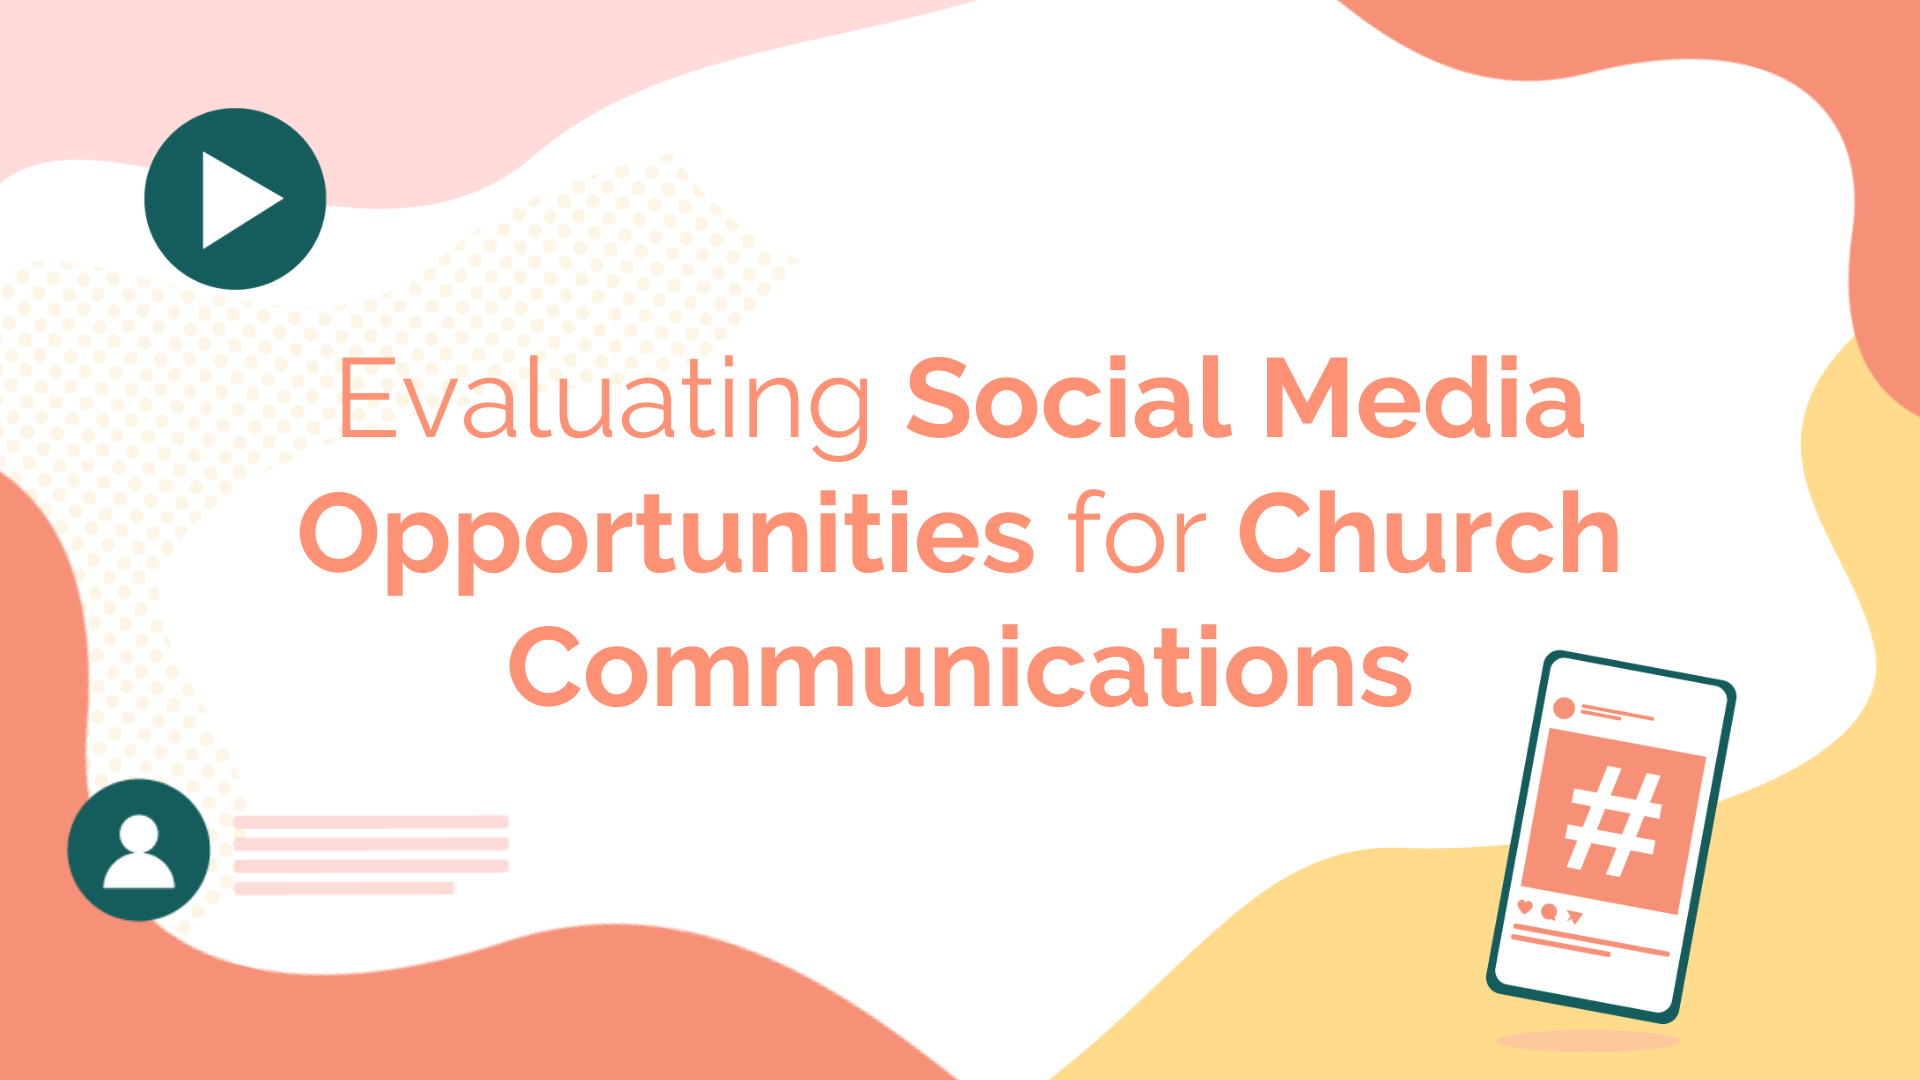 Evaluating Social Media Opportunities for Church Communications